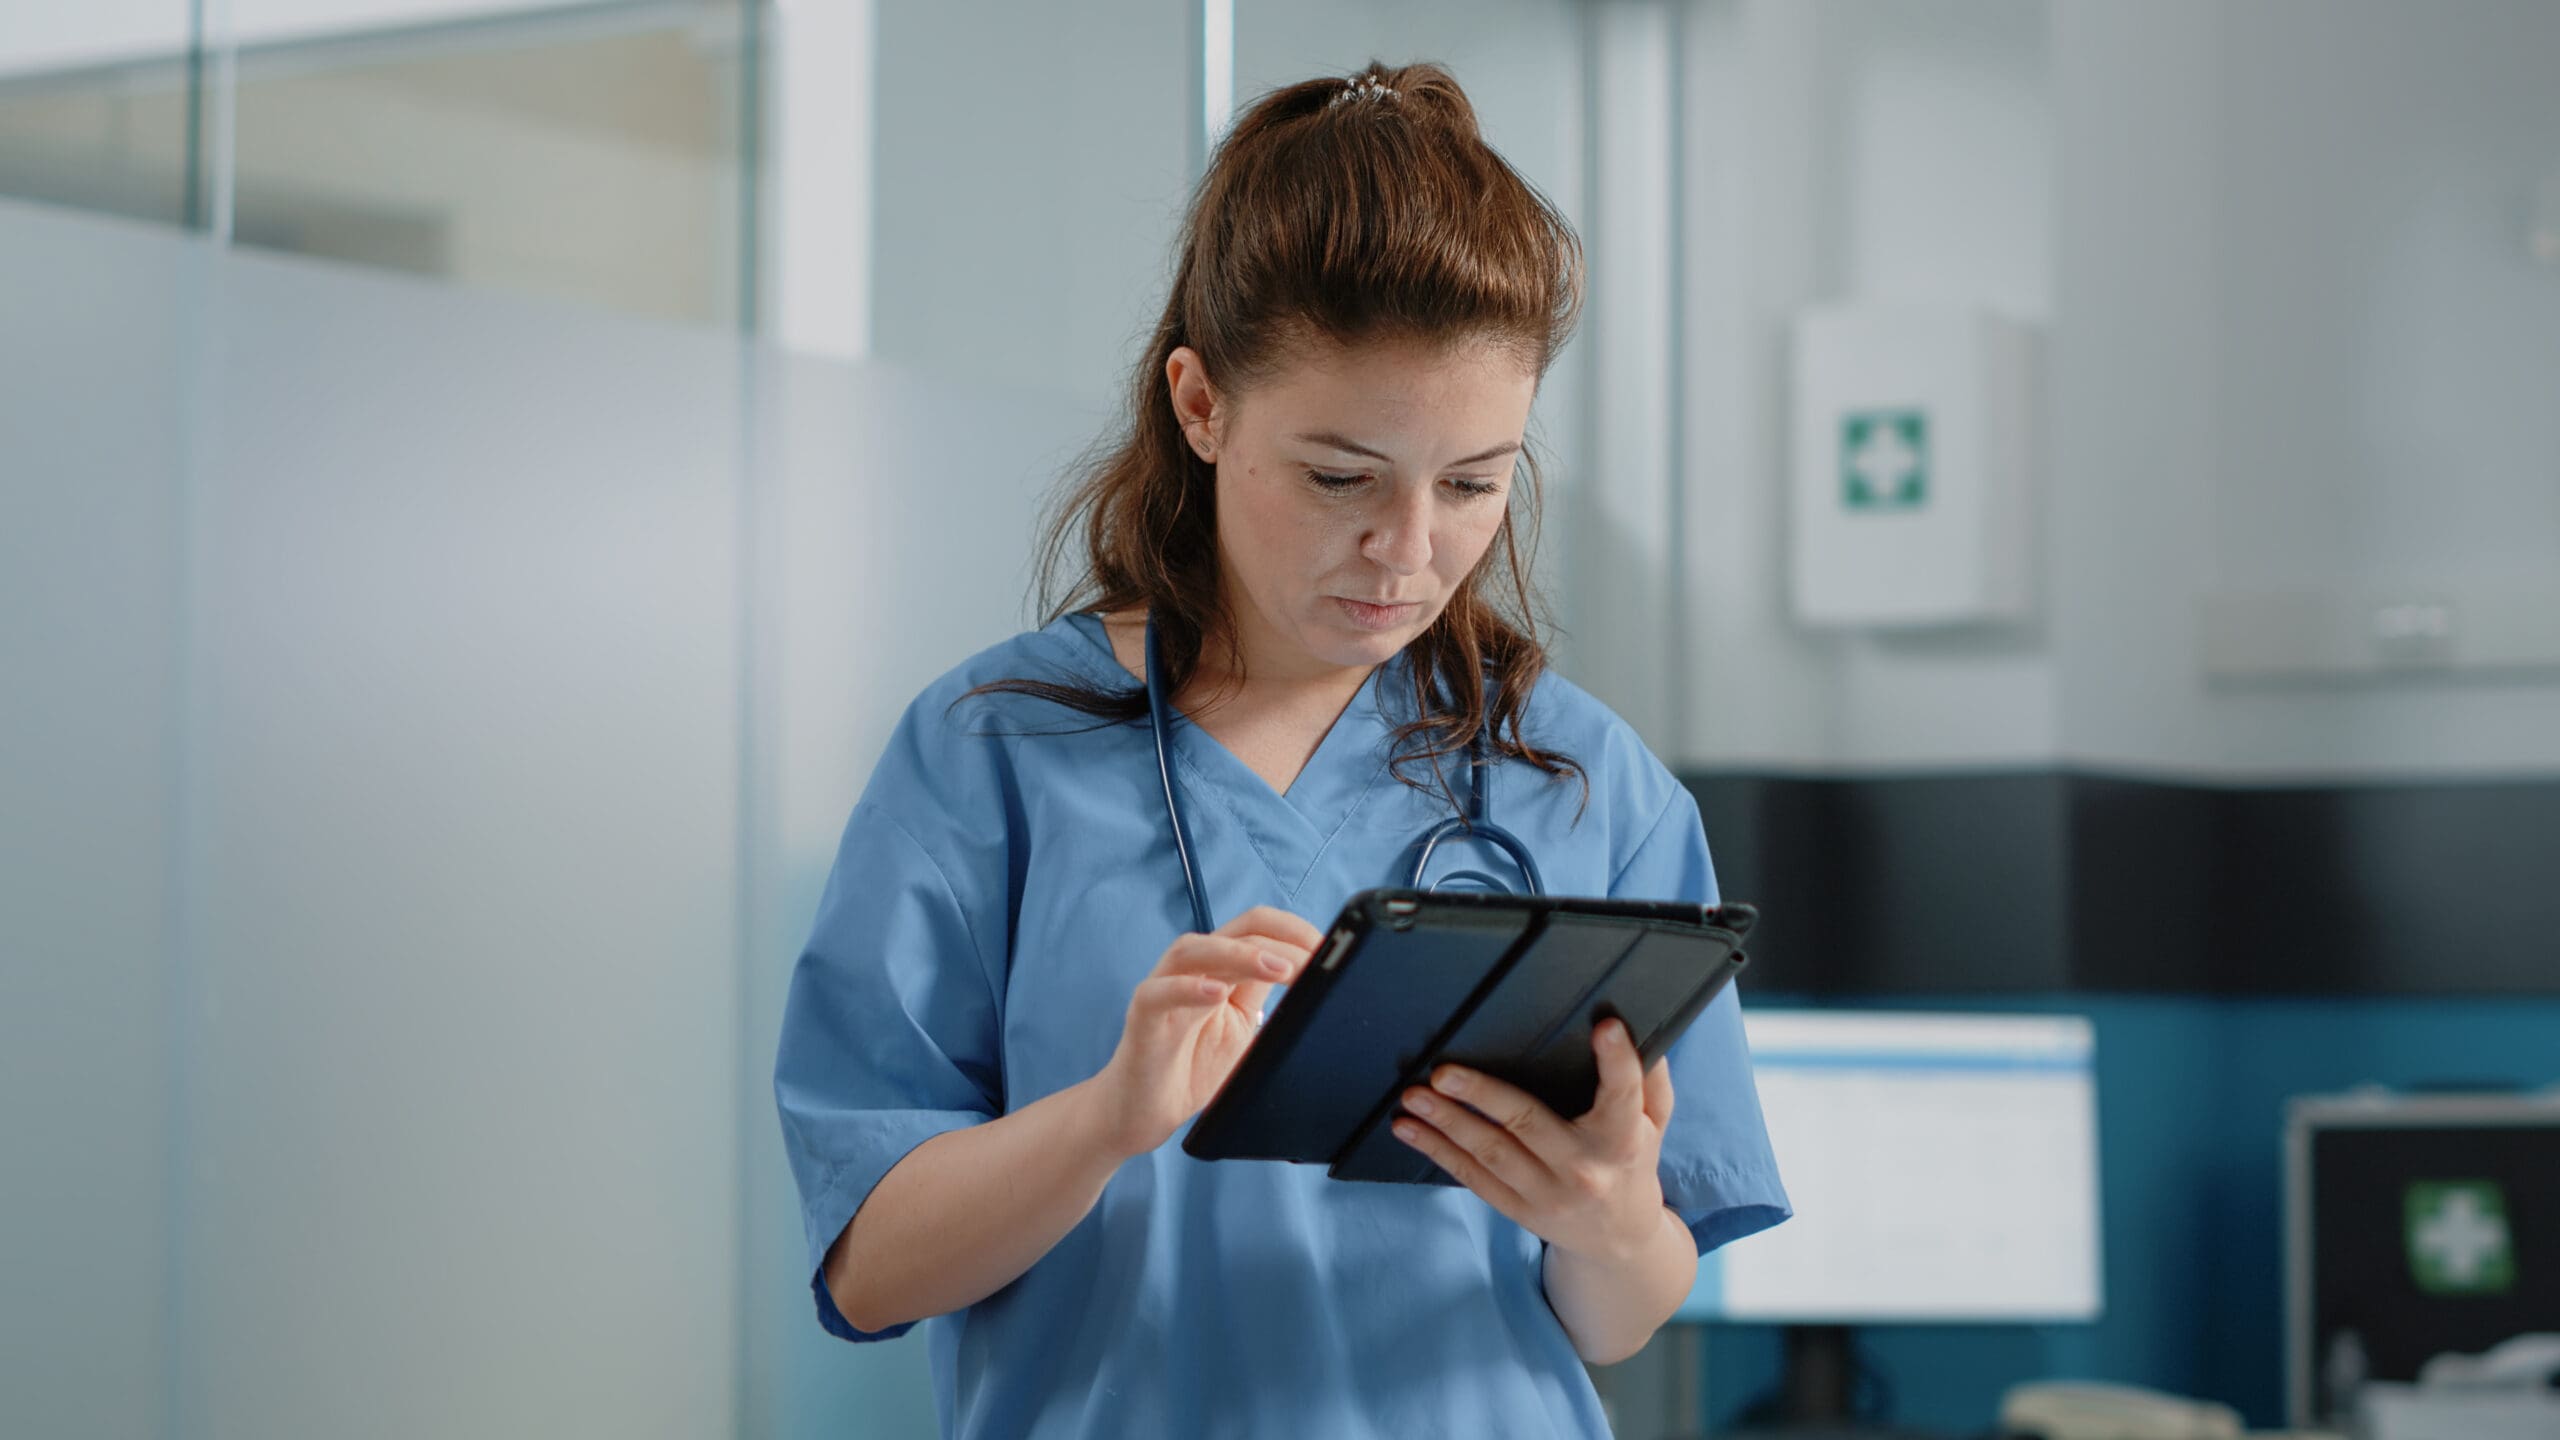 Caucasian nurse using digital tablet with touch screen